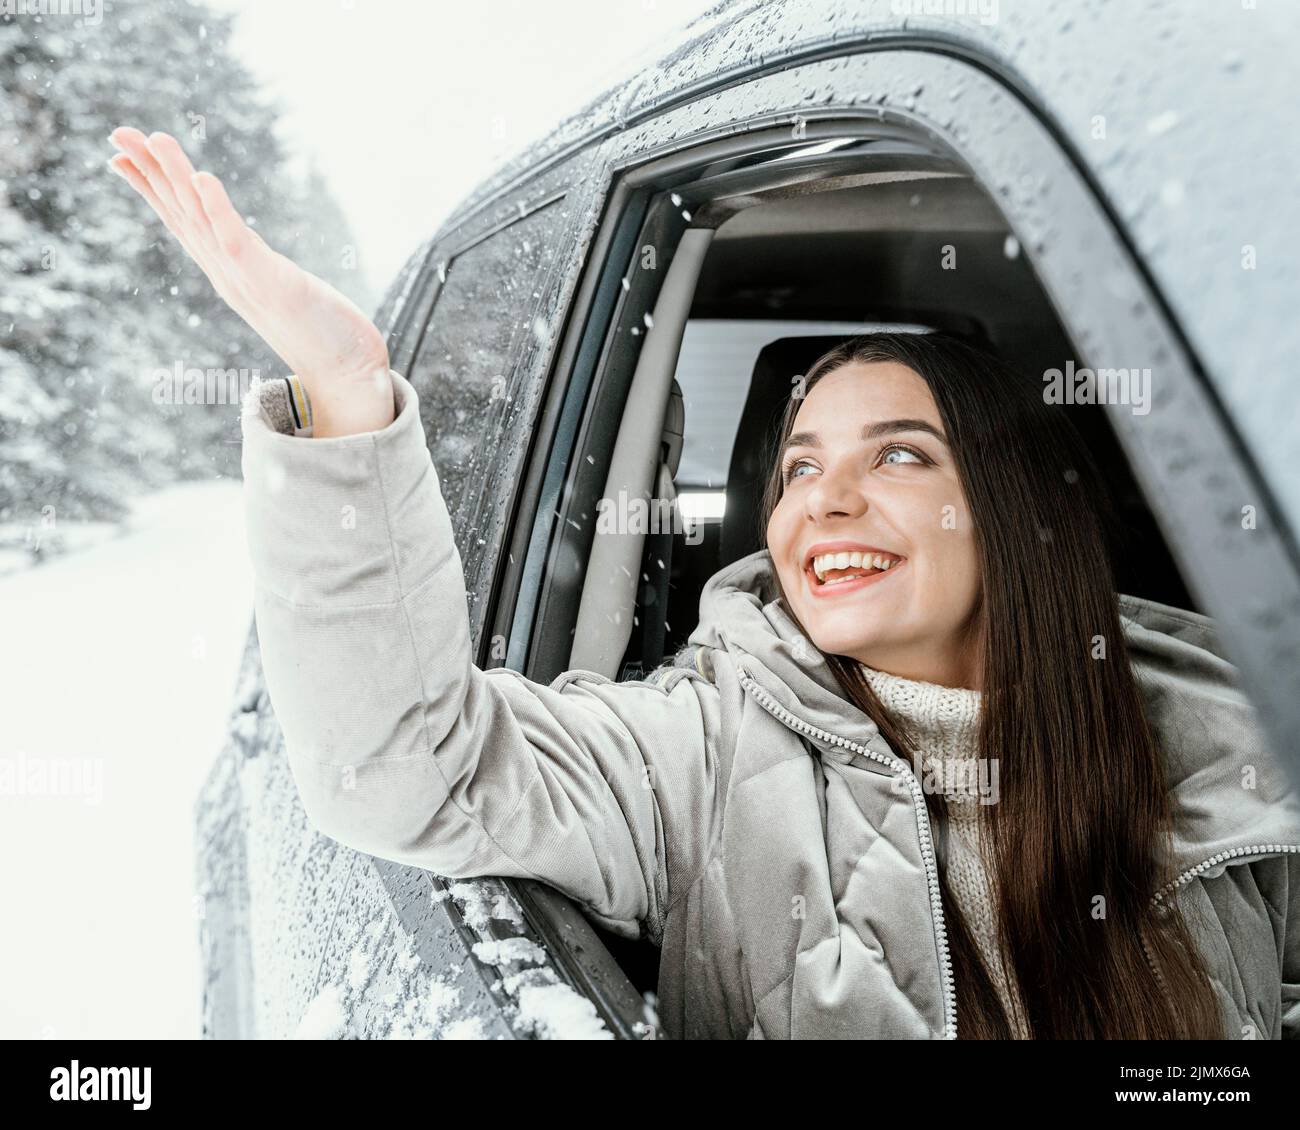 Front view smiley woman car while road trip Stock Photo